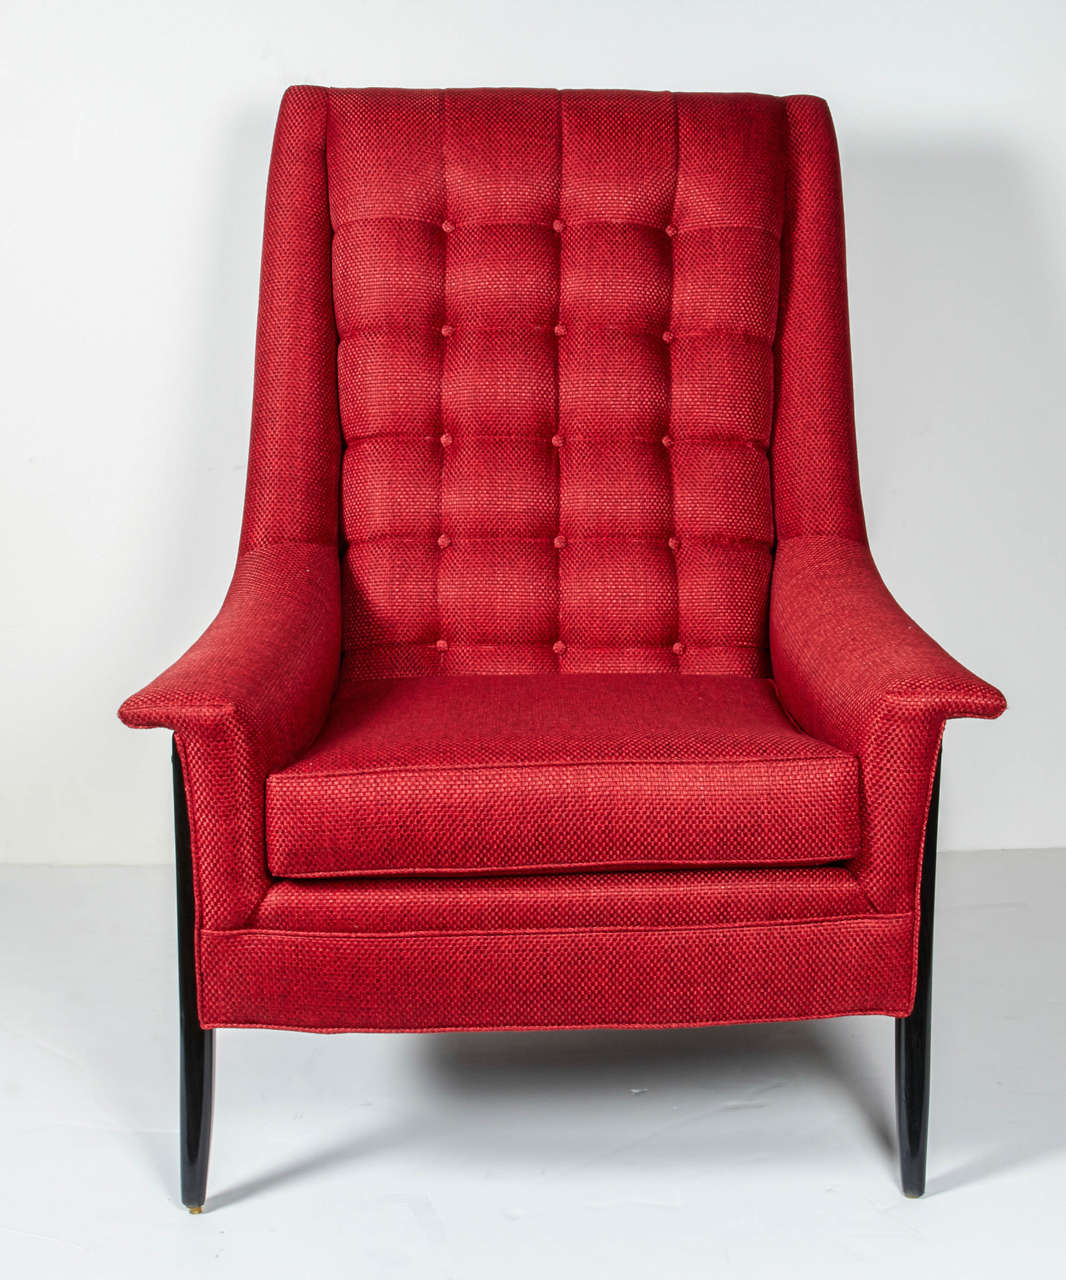 Biscuit tufted back newly reupholstered in Vermillion red woven tweed and refinished wooden ebonized frame and legs. The beautiful streamline Silhouette is an excellent example of the American Mid-Century Modern aesthetic.